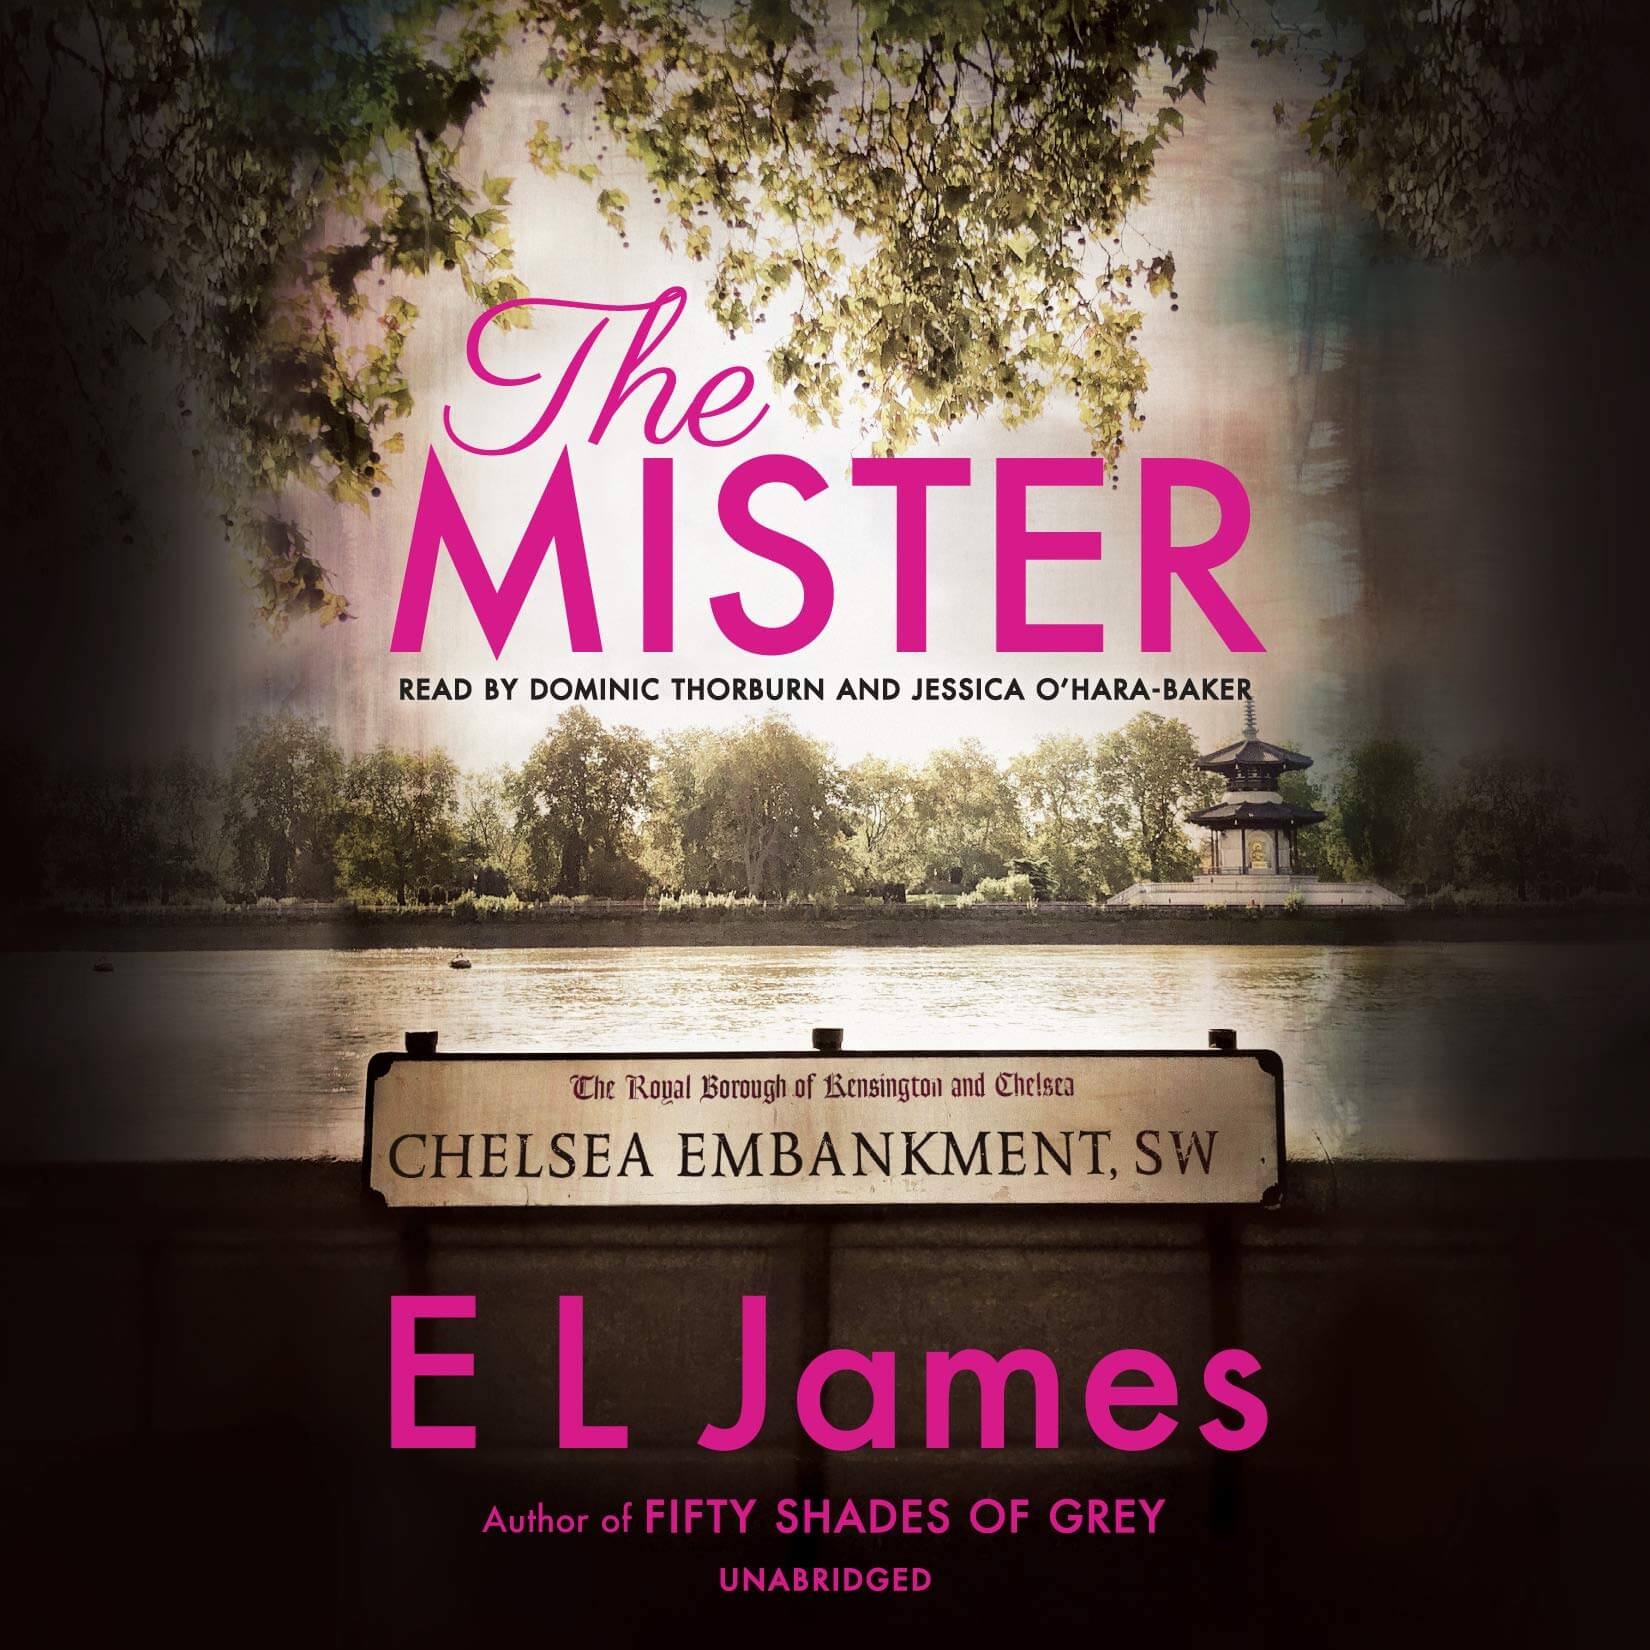 Fifty Shades of Gray author E.L. James is back with another book!